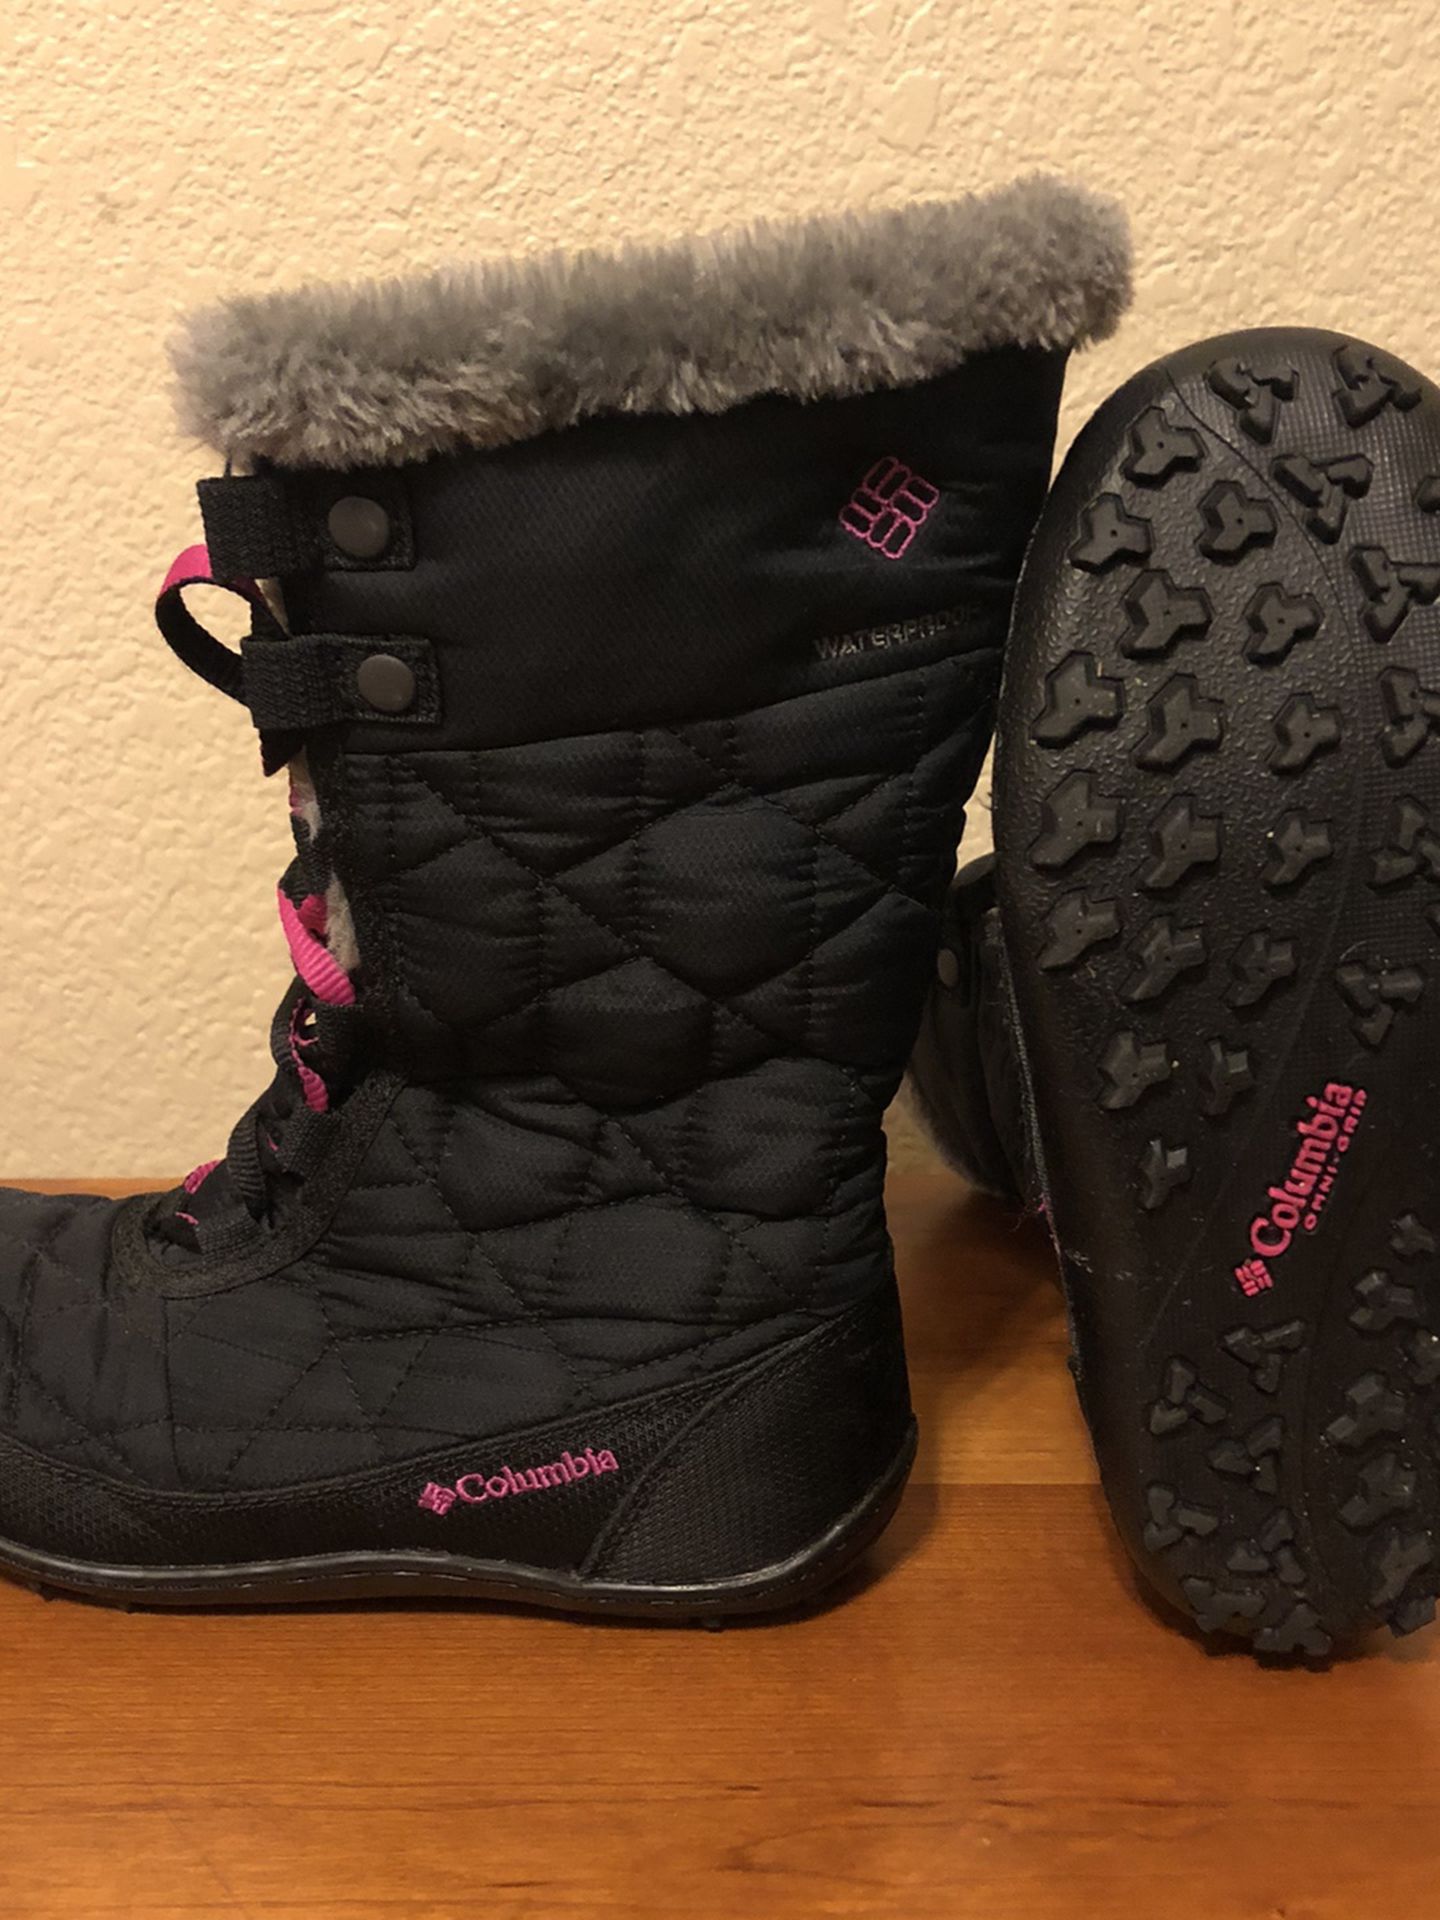 Columbia Snow Boots Size 3 Kids